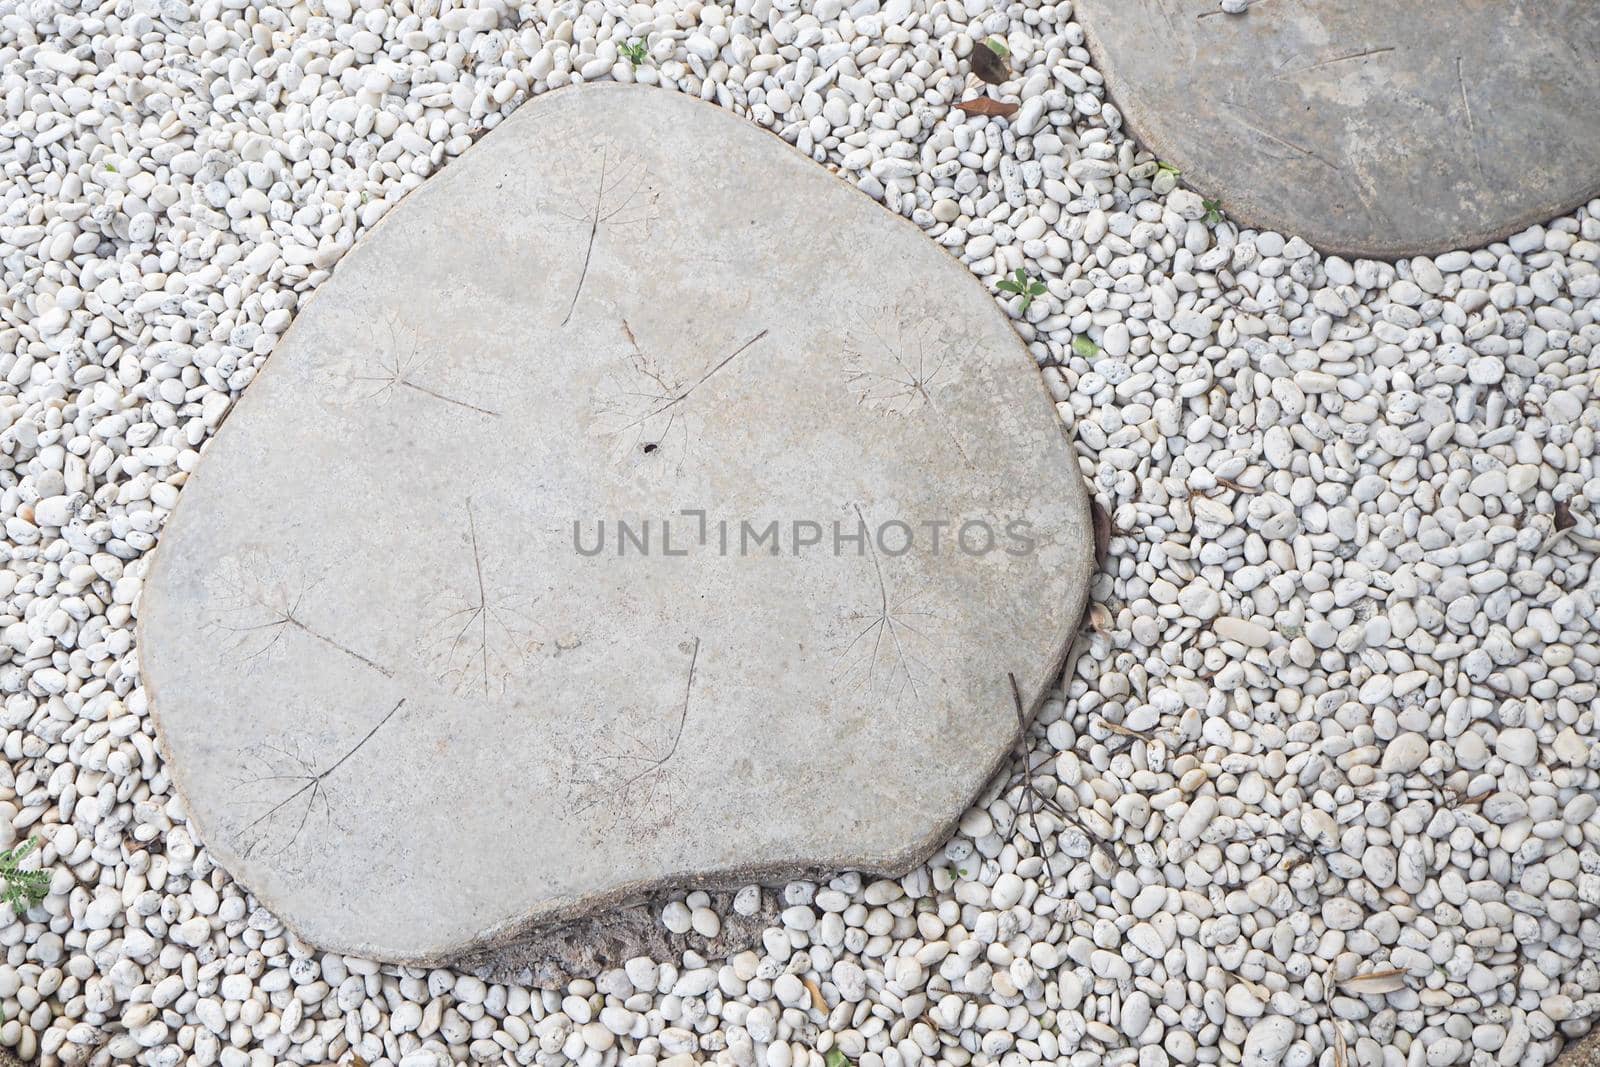 GARDEN STONE PATH. Dry leaf texture on white stone for footpath in rock garden hardscape. by Petrichor